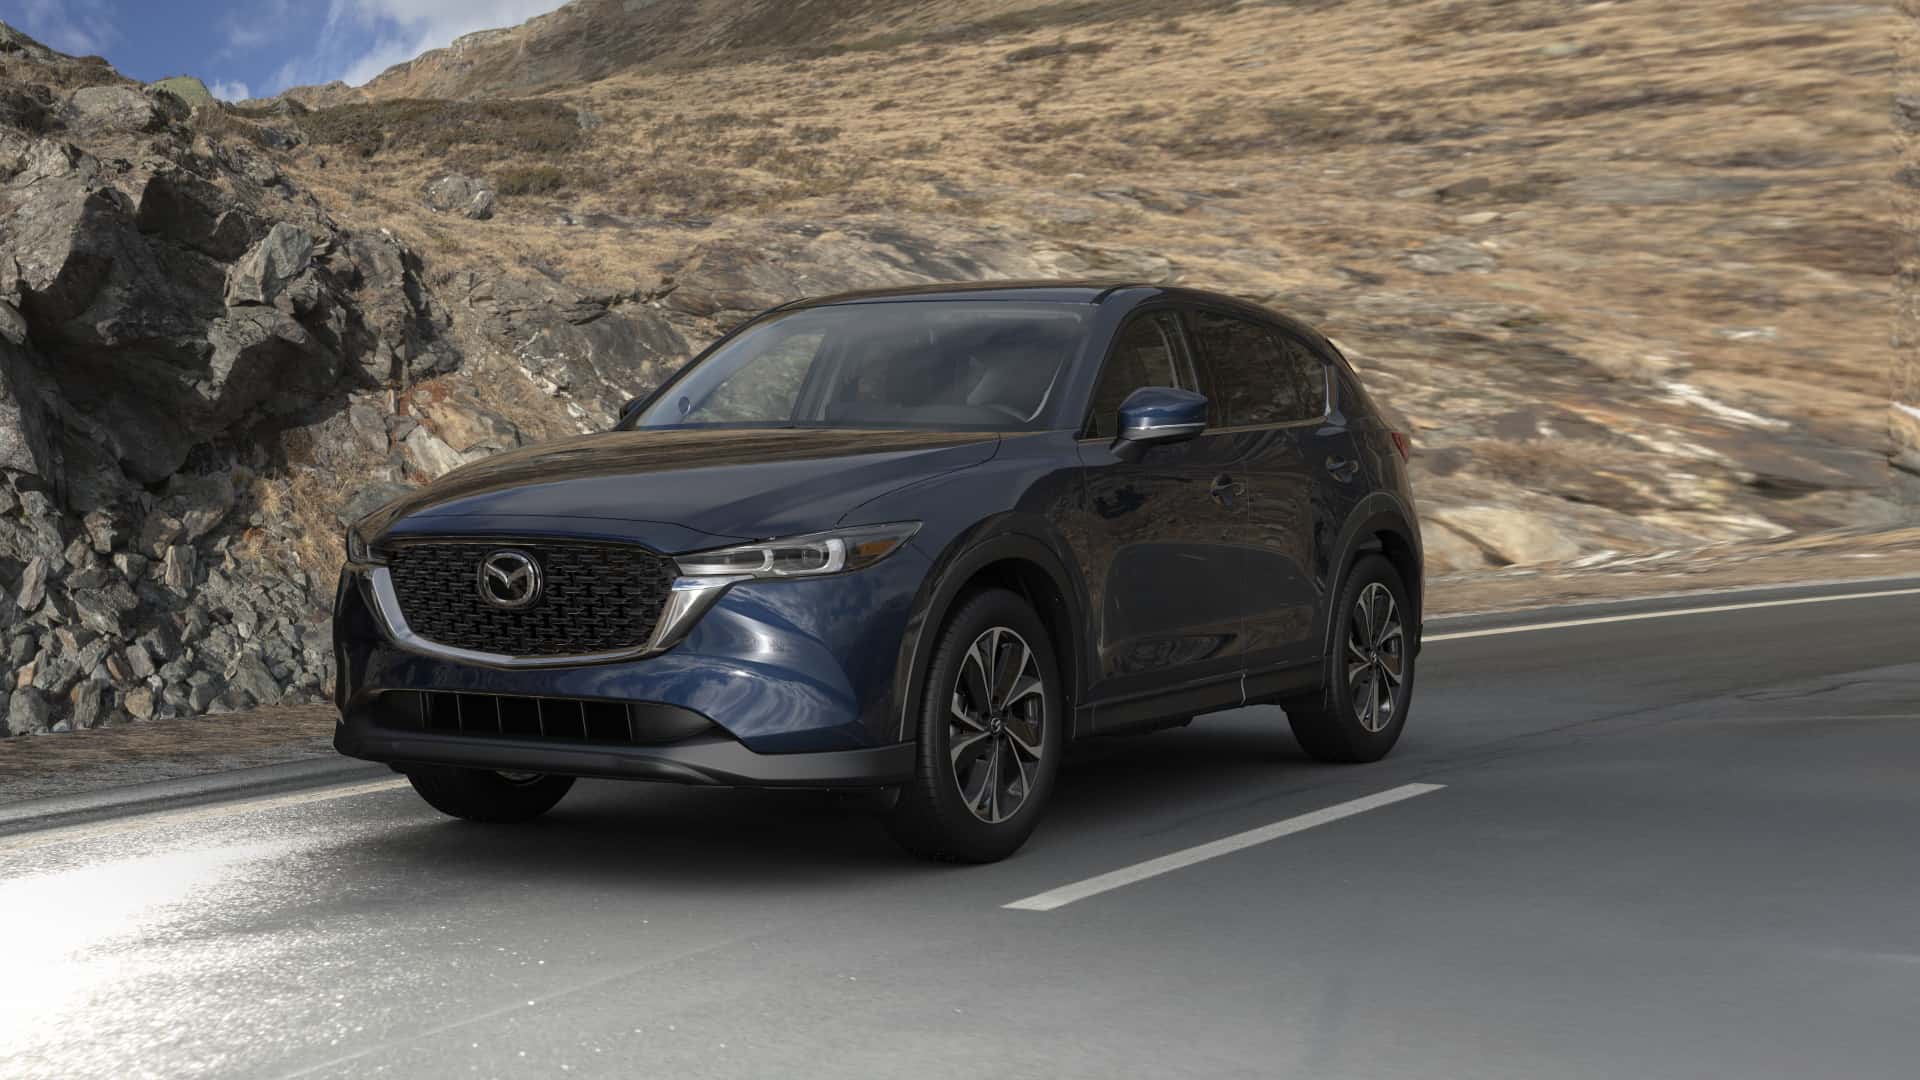 2023 Mazda CX-5 2.5 S Premium Deep Crystal Blue Mica | Russell & Smith Mazda in Houston TX